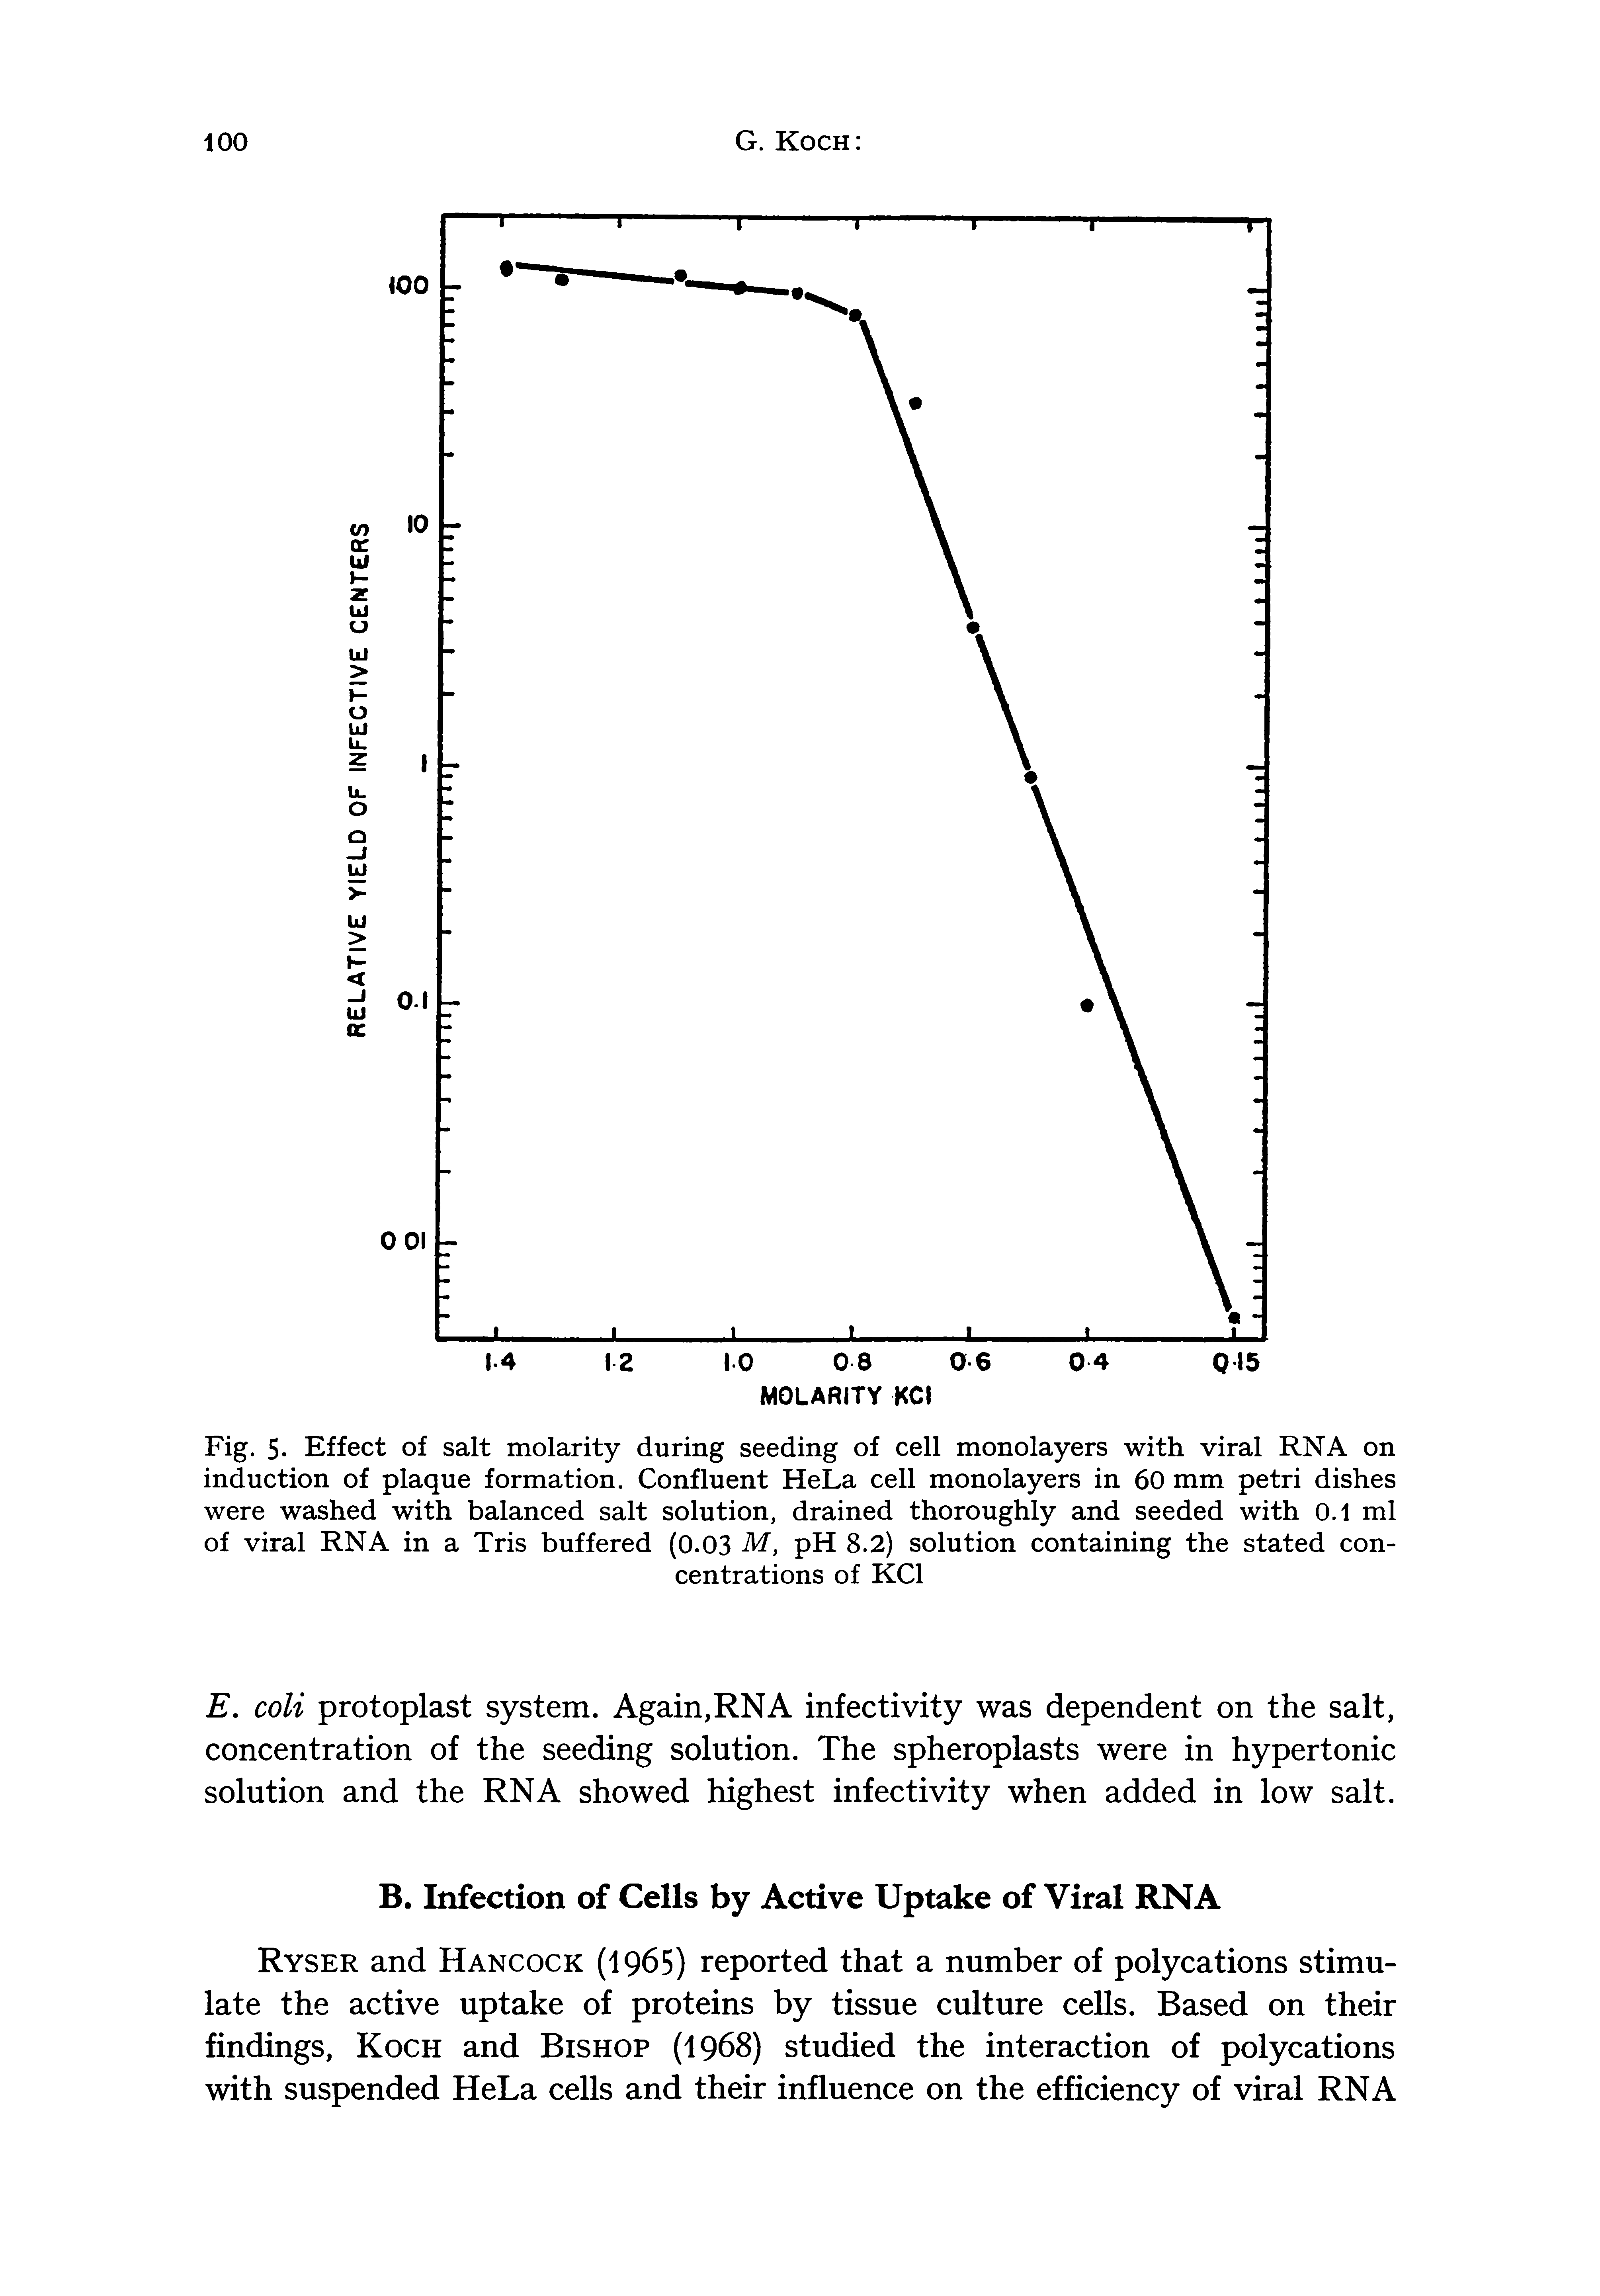 Fig. 5- Effect of salt molarity during seeding of cell monolayers with viral RNA on induction of plaque formation. Confluent HeLa cell monolayers in 60 mm petri dishes were washed with balanced salt solution, drained thoroughly and seeded with 0.1 ml of viral RNA in a Tris buffered (0.03 M, pH 8.2) solution containing the stated concentrations of KCl...